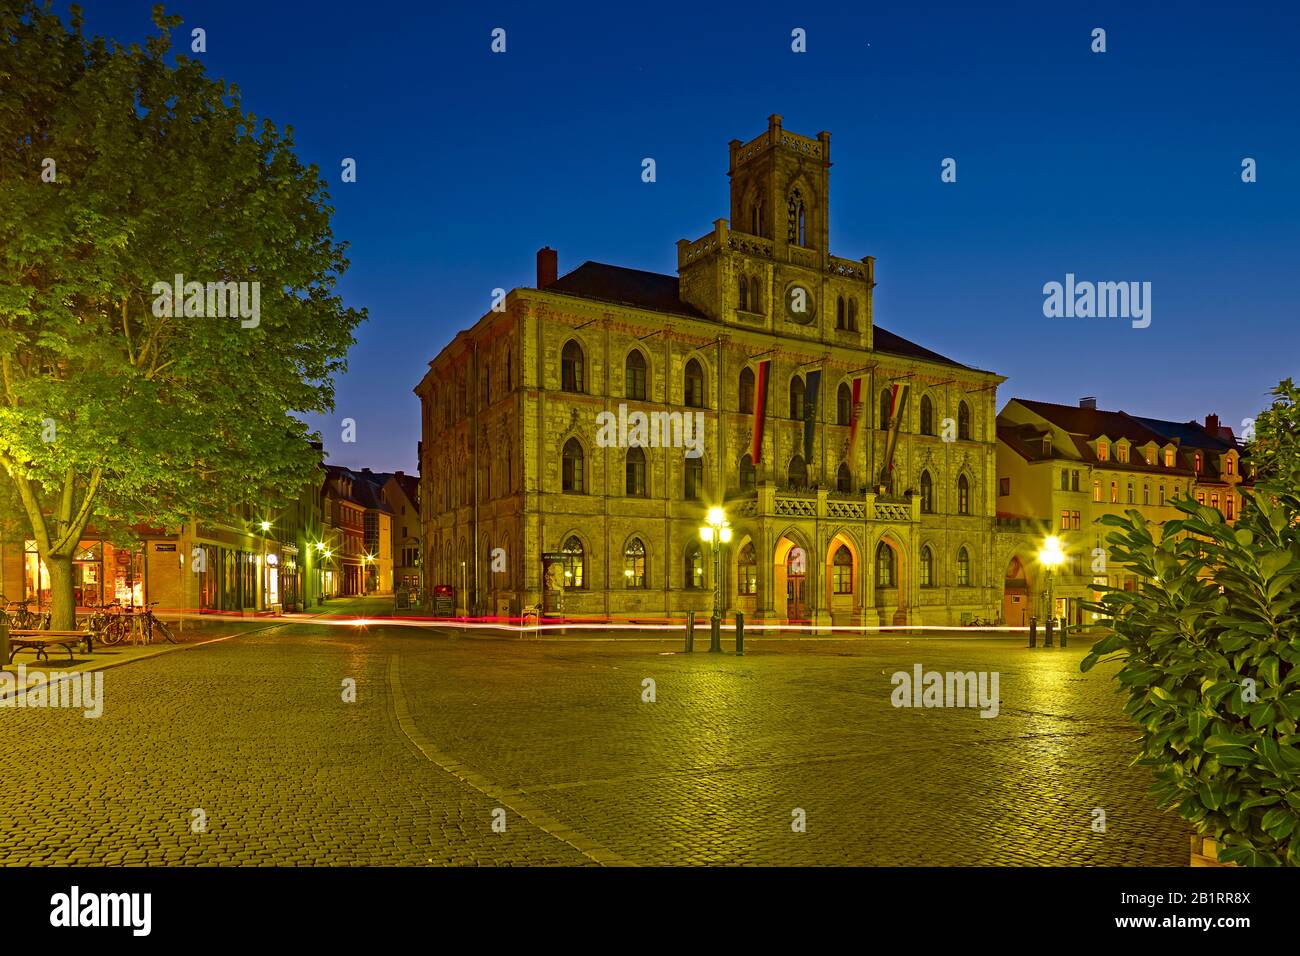 Market with town hall in Weimar, Thuringia, Germany, Stock Photo